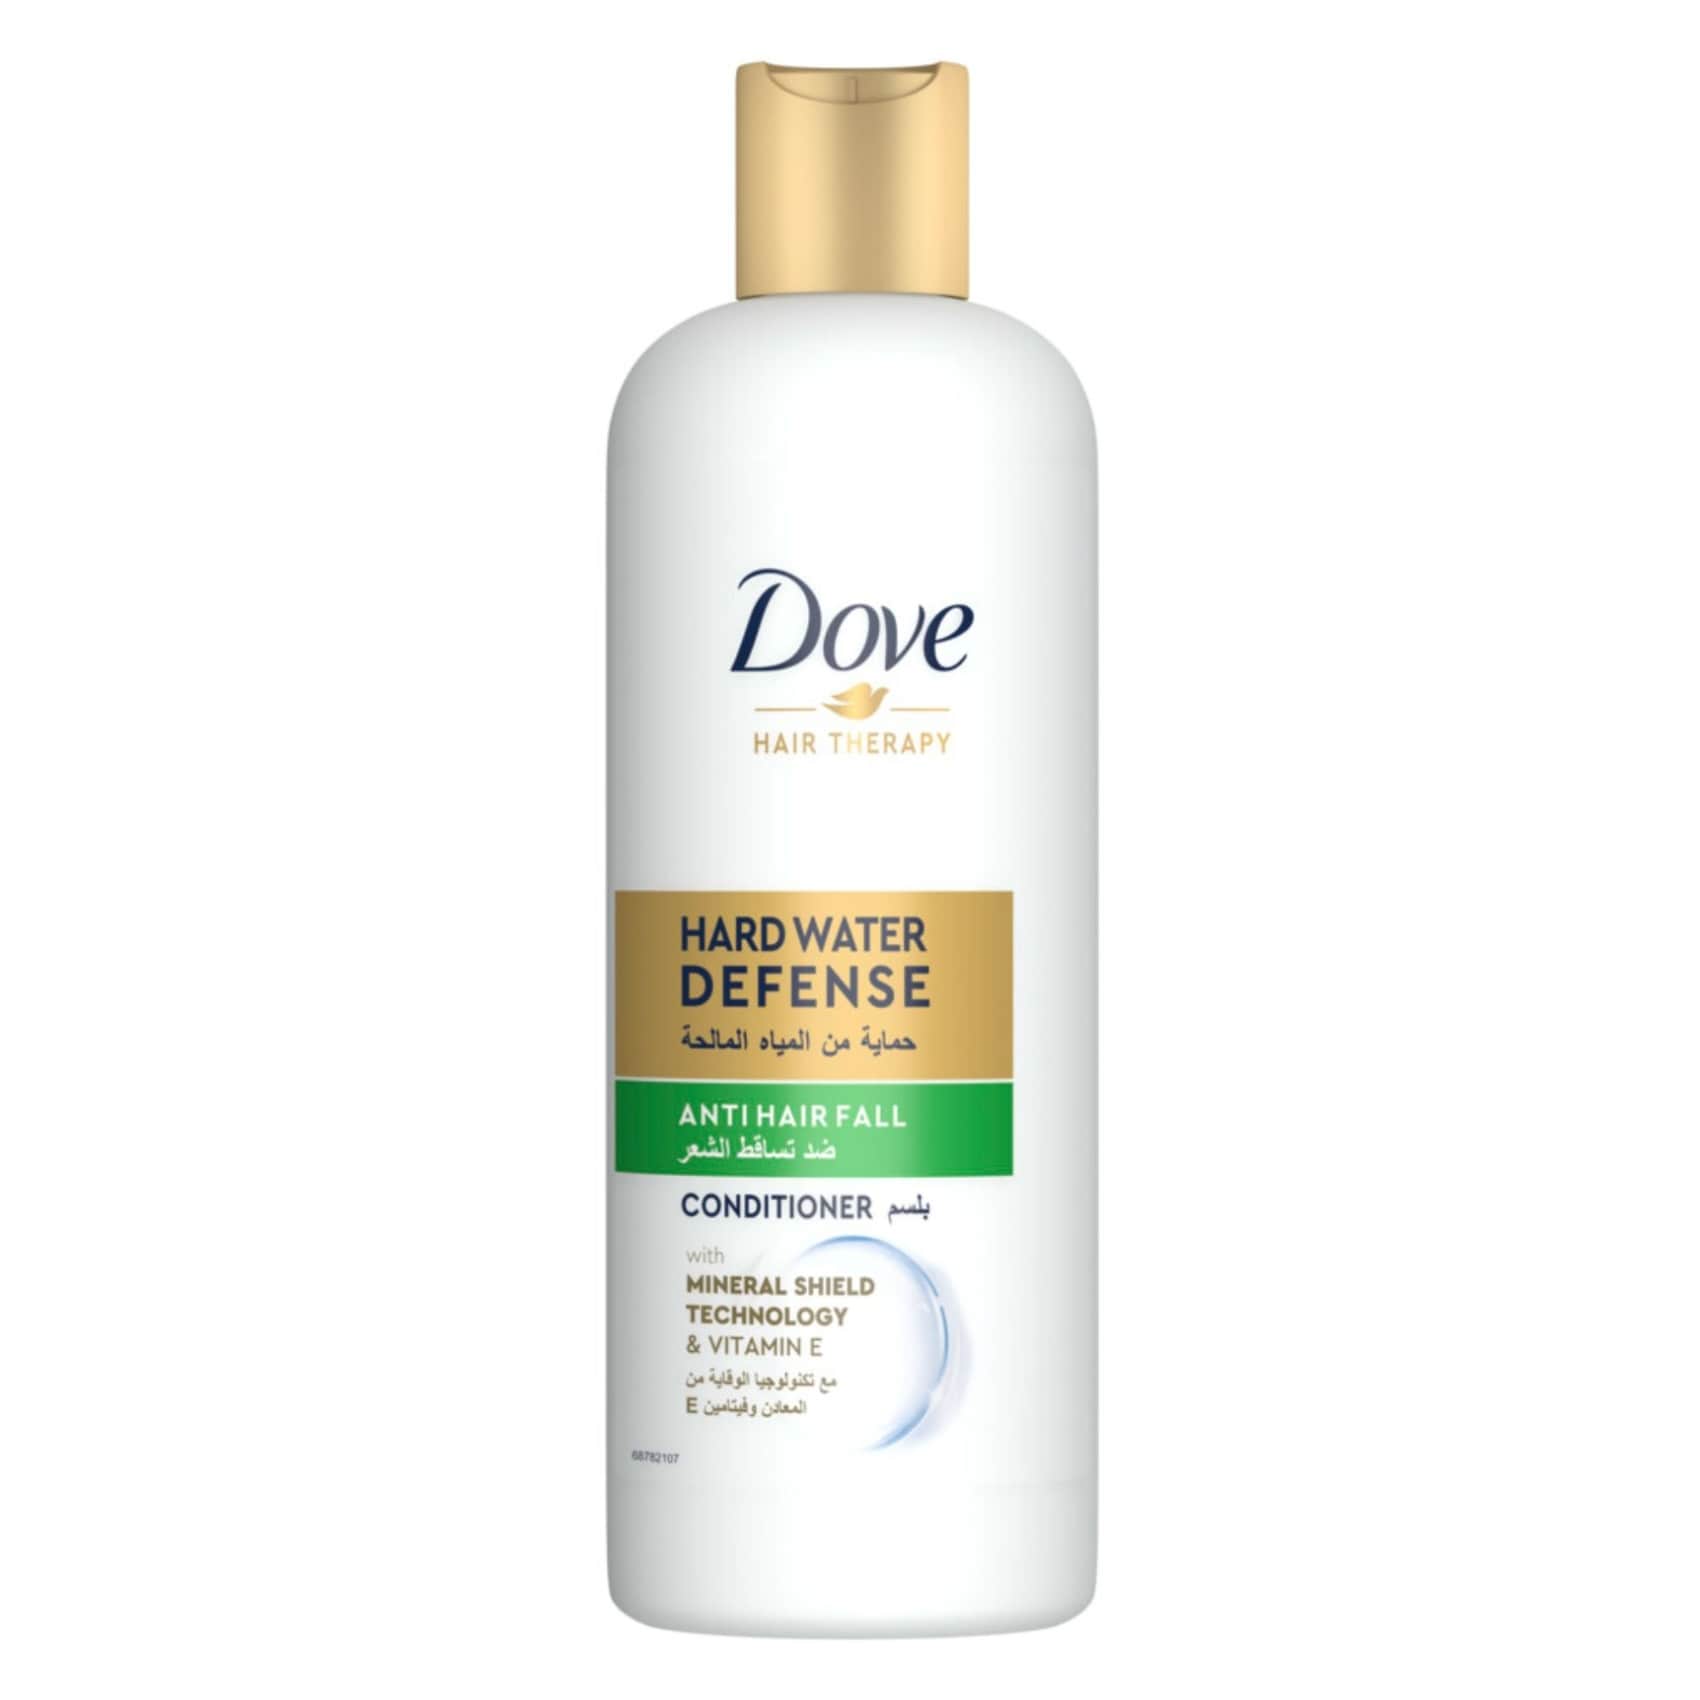 Buy Dove Hair Therapy Conditioner Anti Hair Fall Hard Water Defense 98%  Less Hair Fall After The 1St Wash 400ml Online - Shop Beauty & Personal  Care on Carrefour UAE